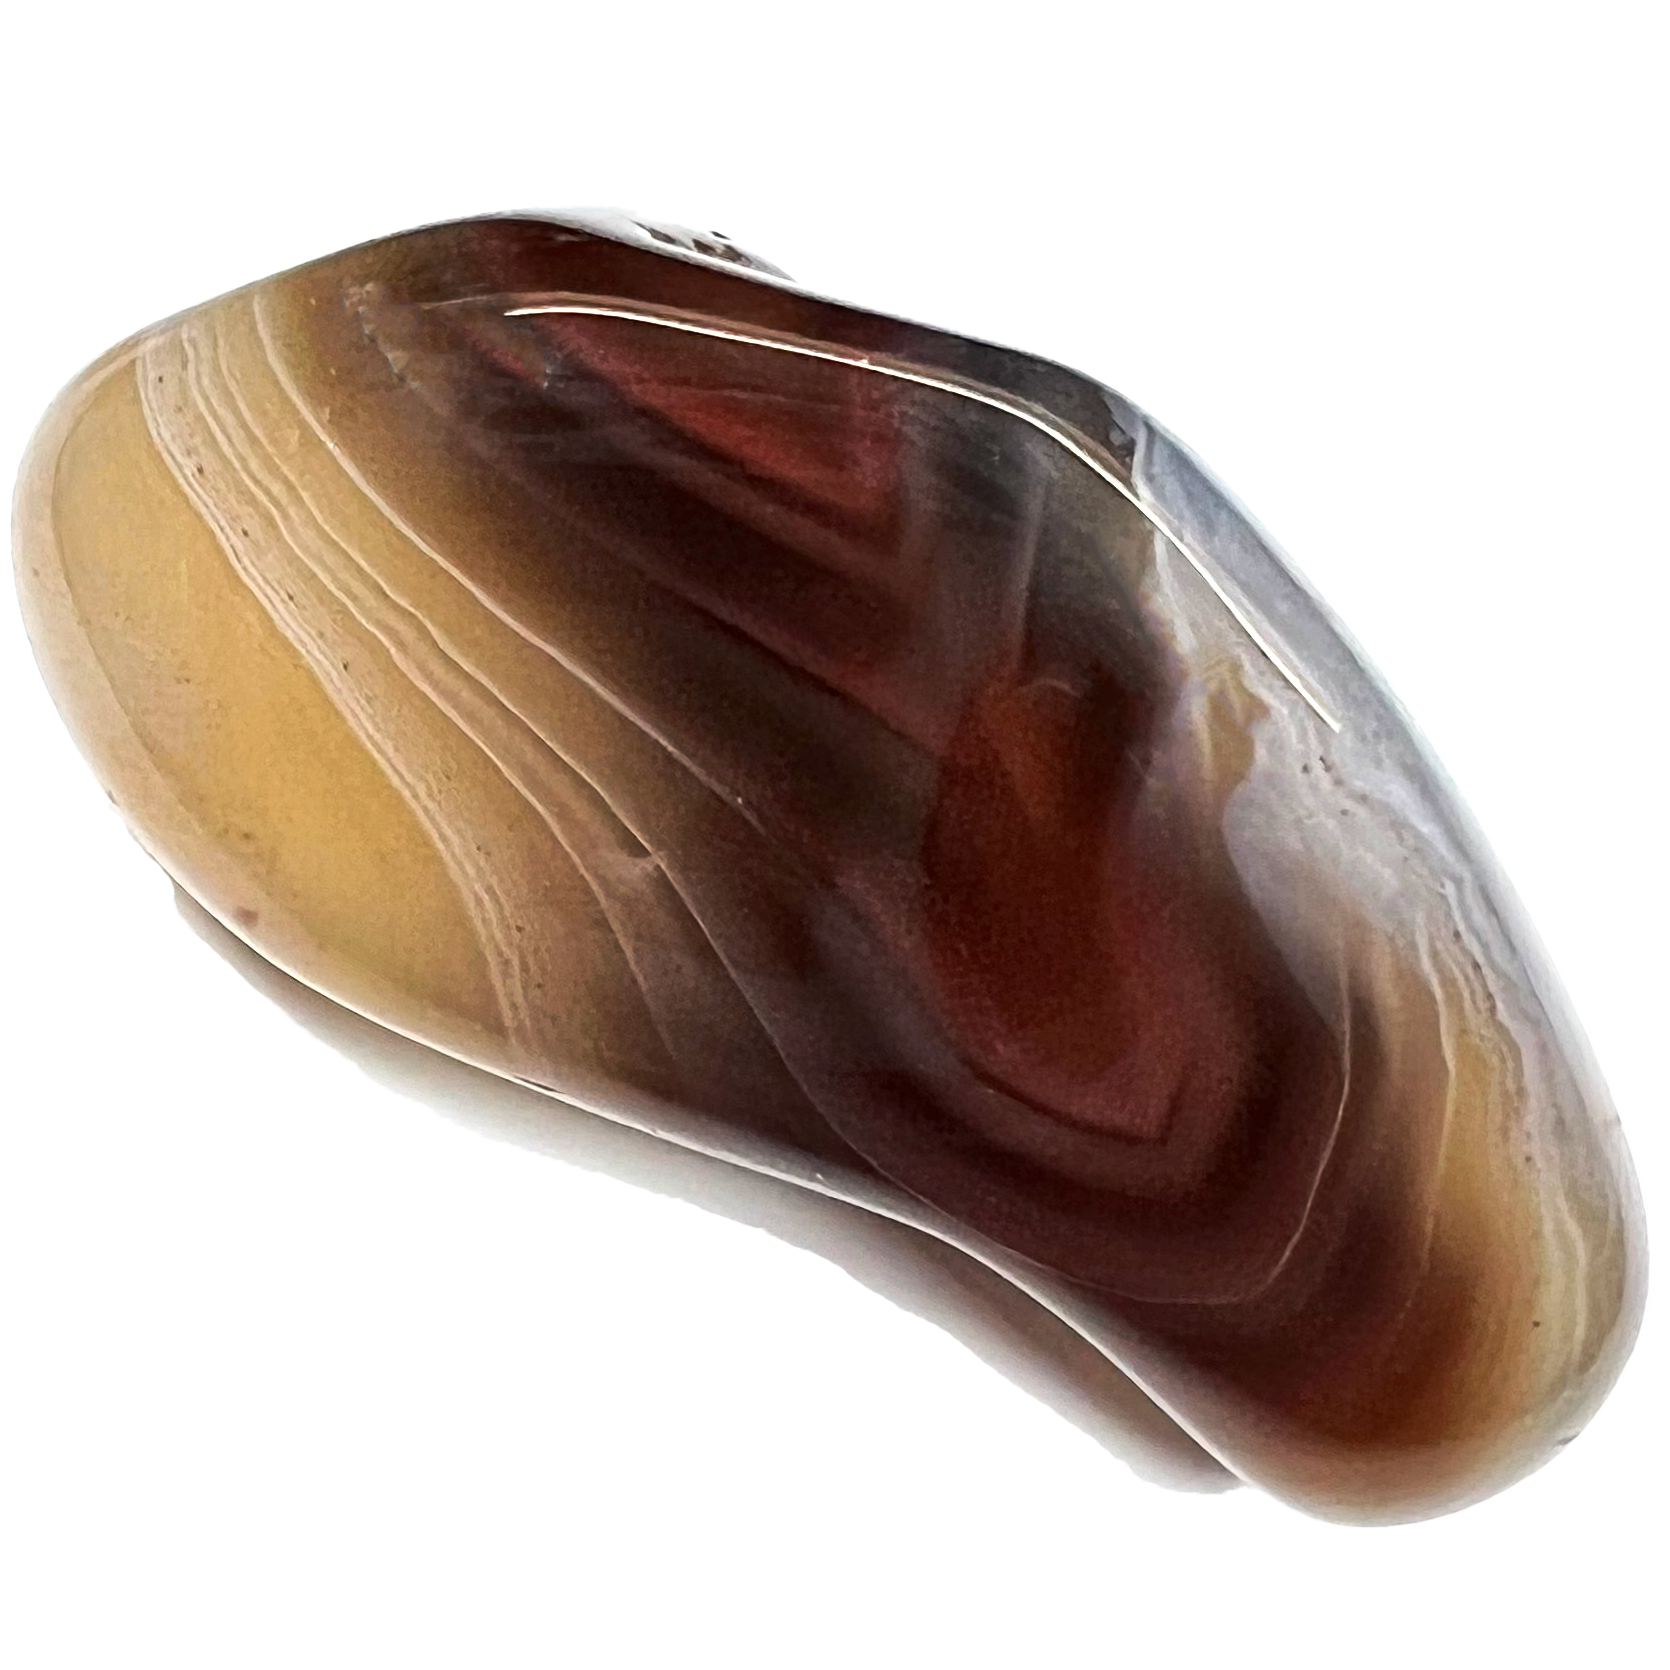 A tumble polished sardonyx agate stone.  The stone is brown with banding.